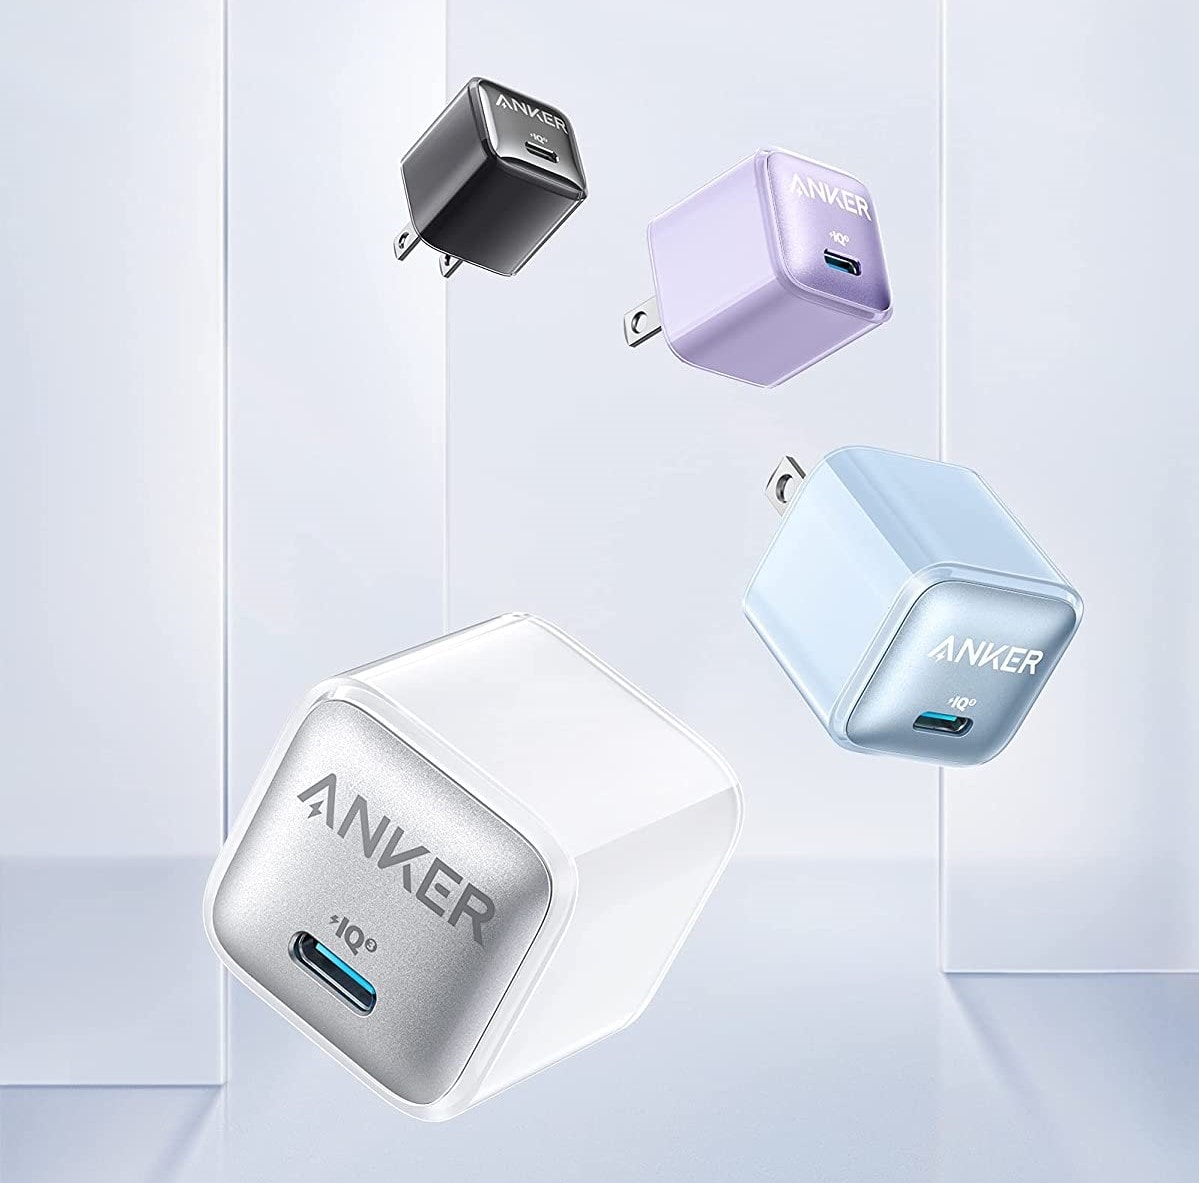 The Anker 511 Charger (Nano Pro) comes in four colors.